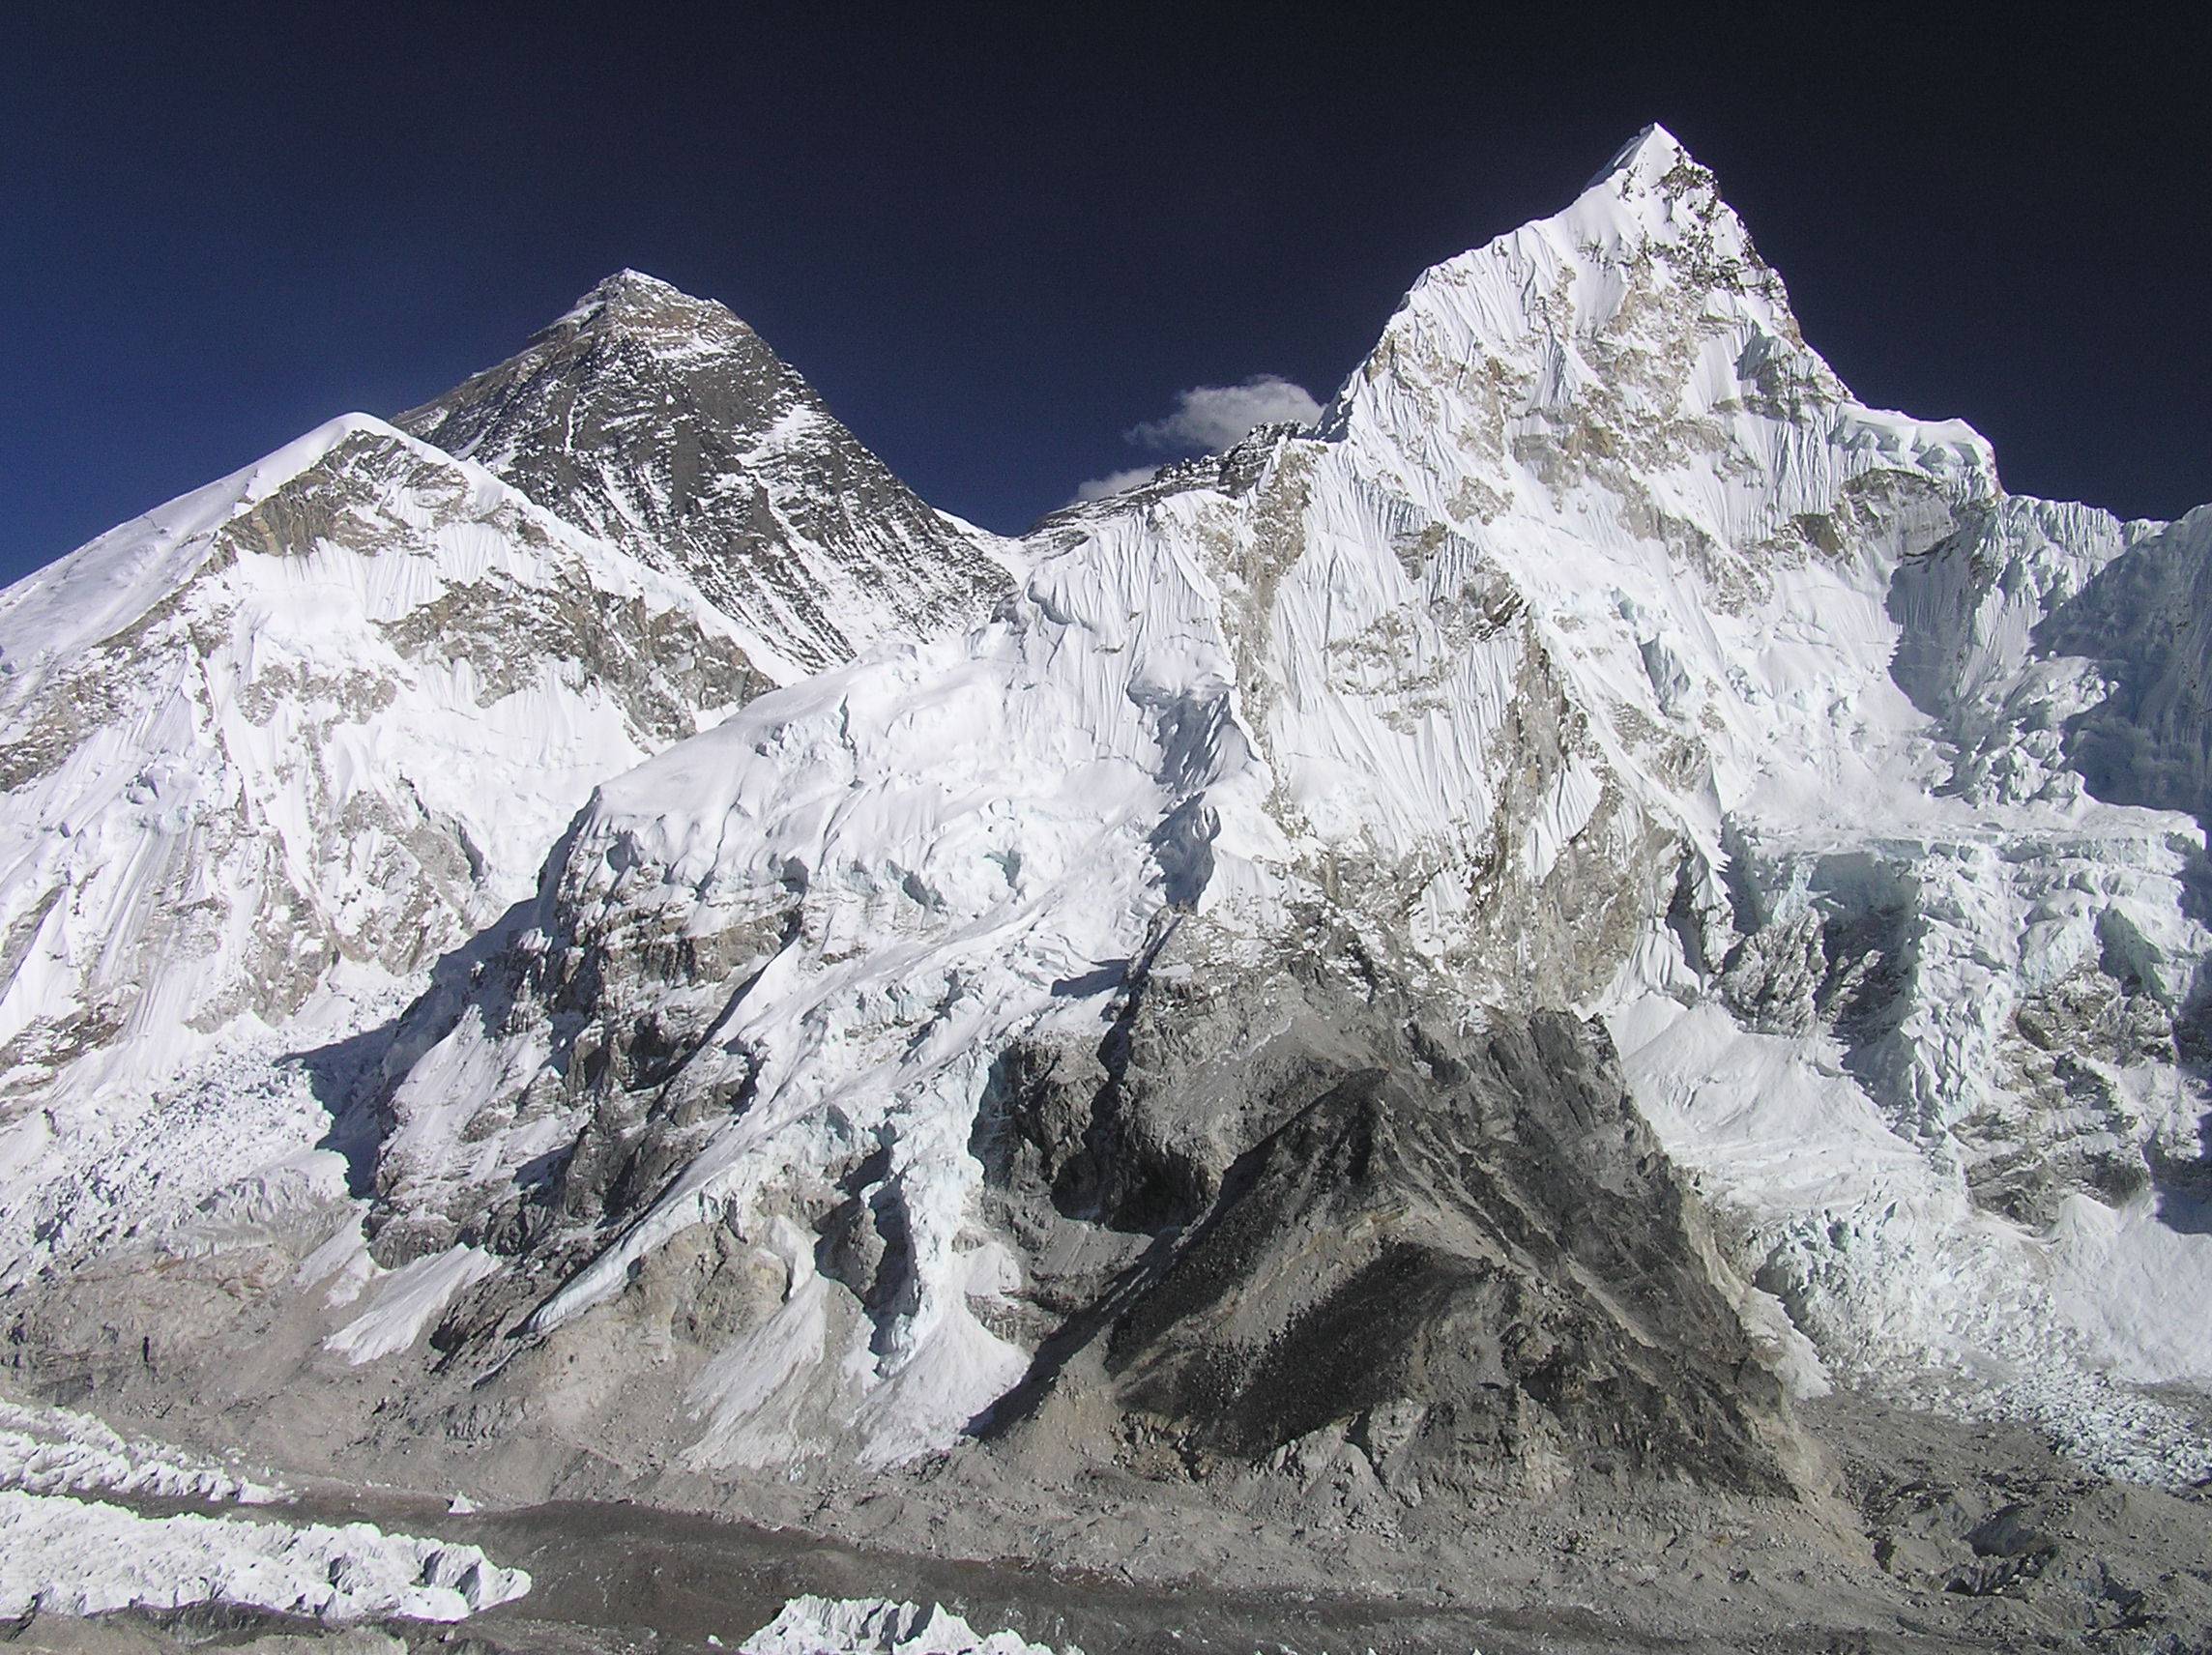 Mount Everest Picture And Wallpaper Information Of Mount Everest